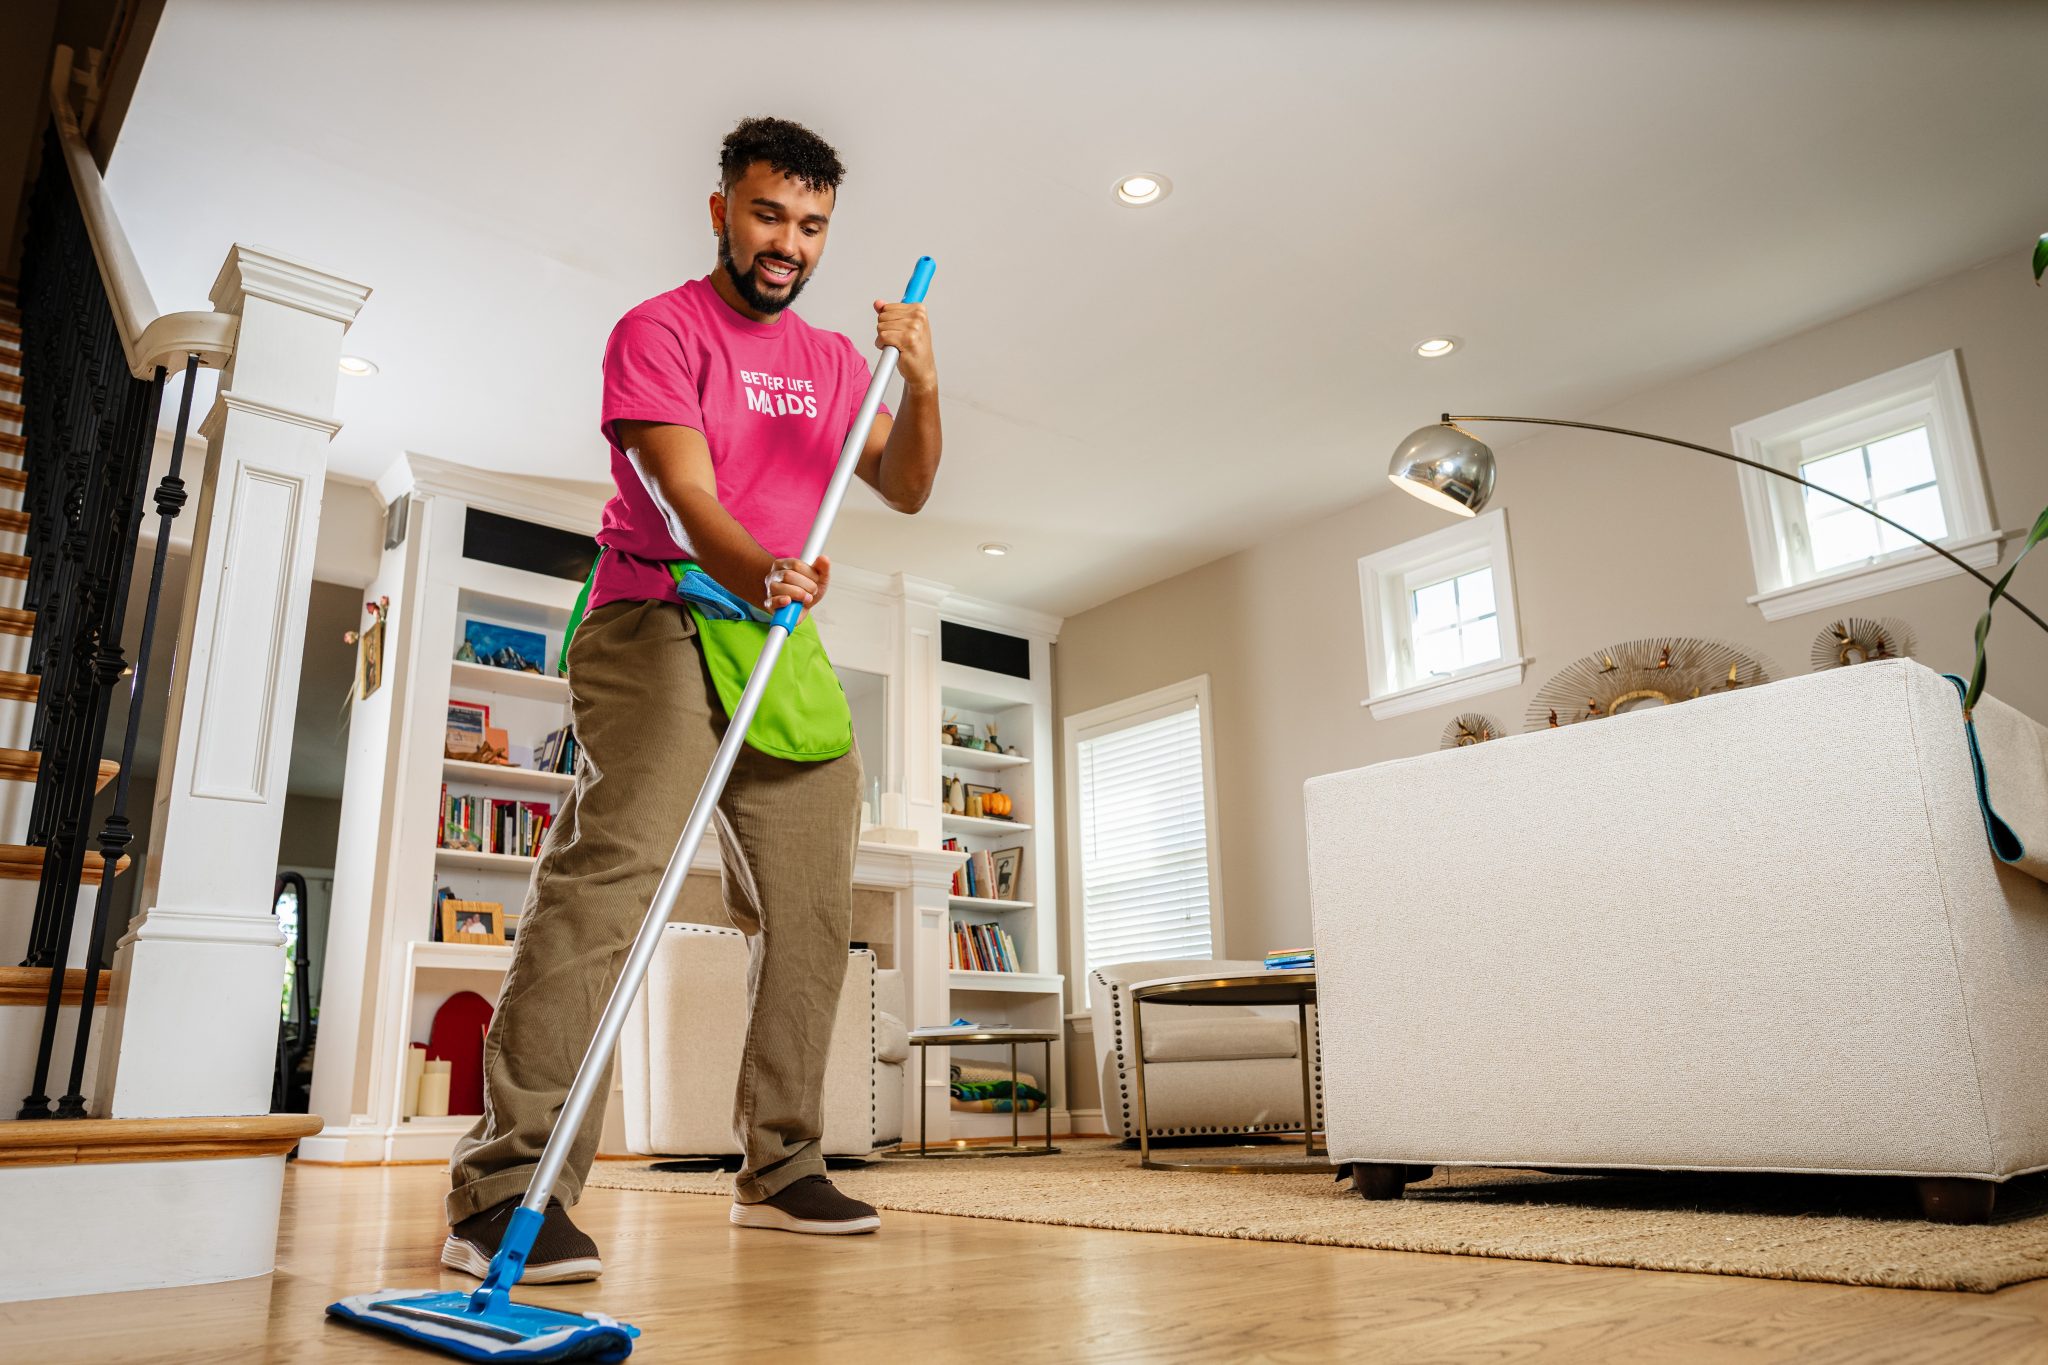 better life maids, house cleaning in Mehlville, house cleaning near me, house cleaning near Mehlville, best maids in Mehlville, best maid service near me, top quality maids, residential cleaner, move out maids Mehlville, green cleaning, eco cleaning